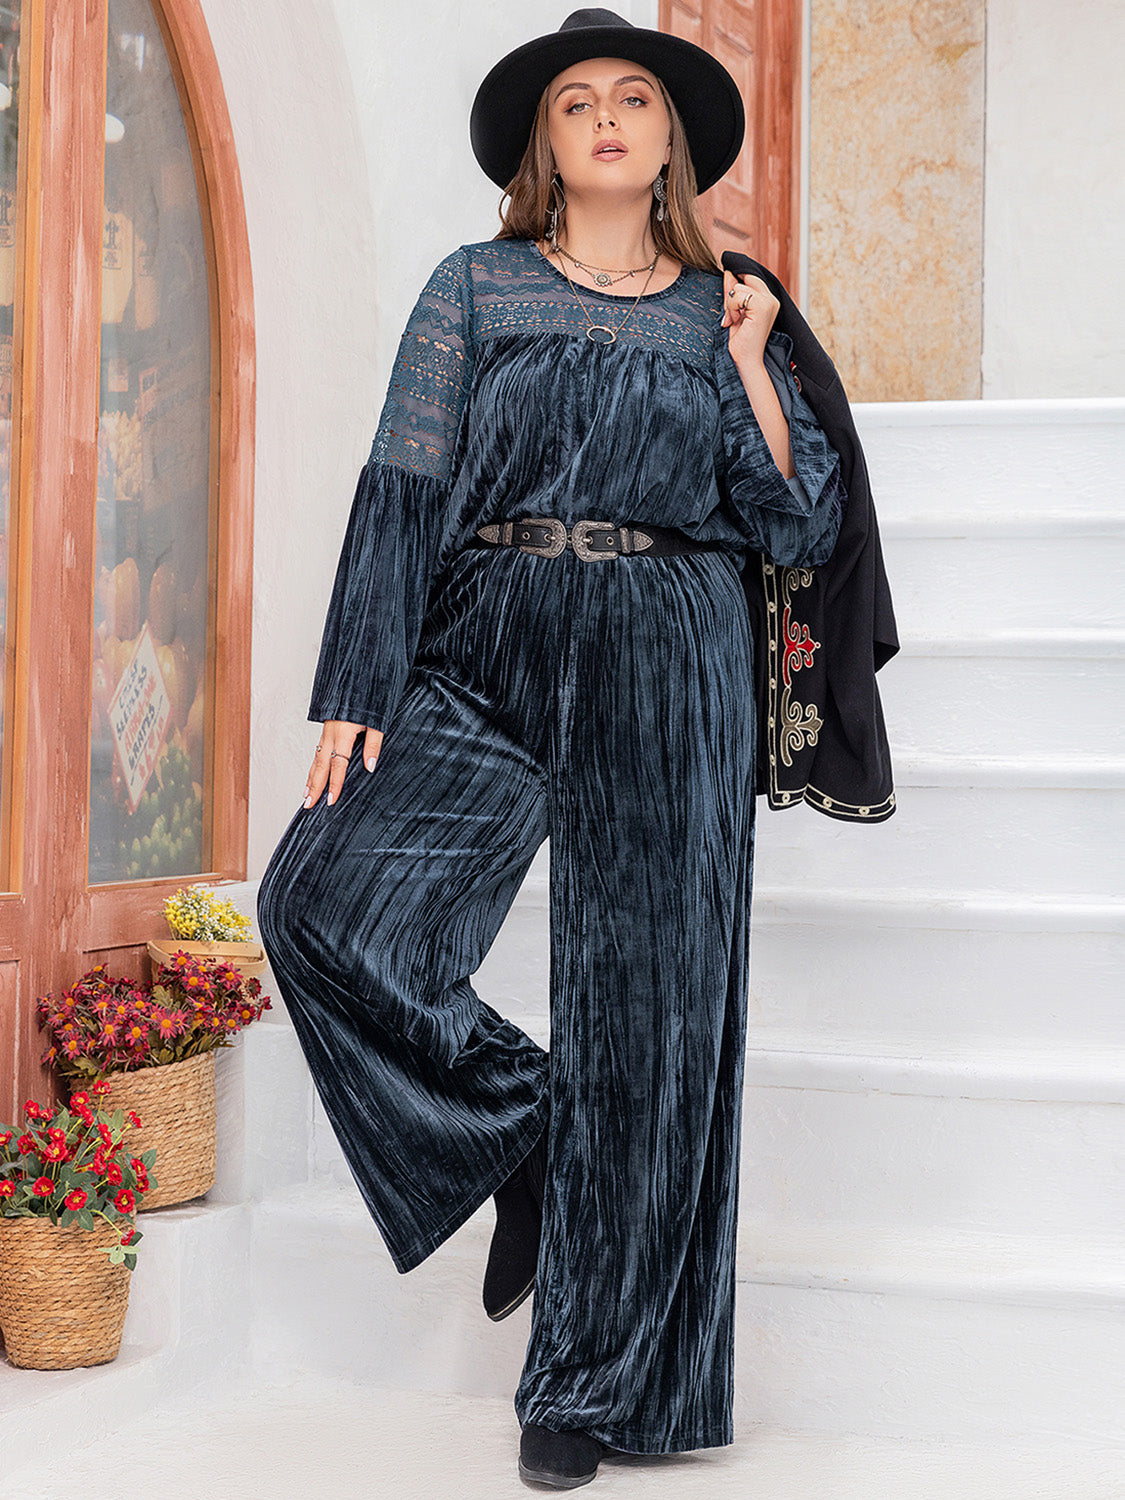 Plus Size Round Neck Flare Sleeve Top and Pants Set